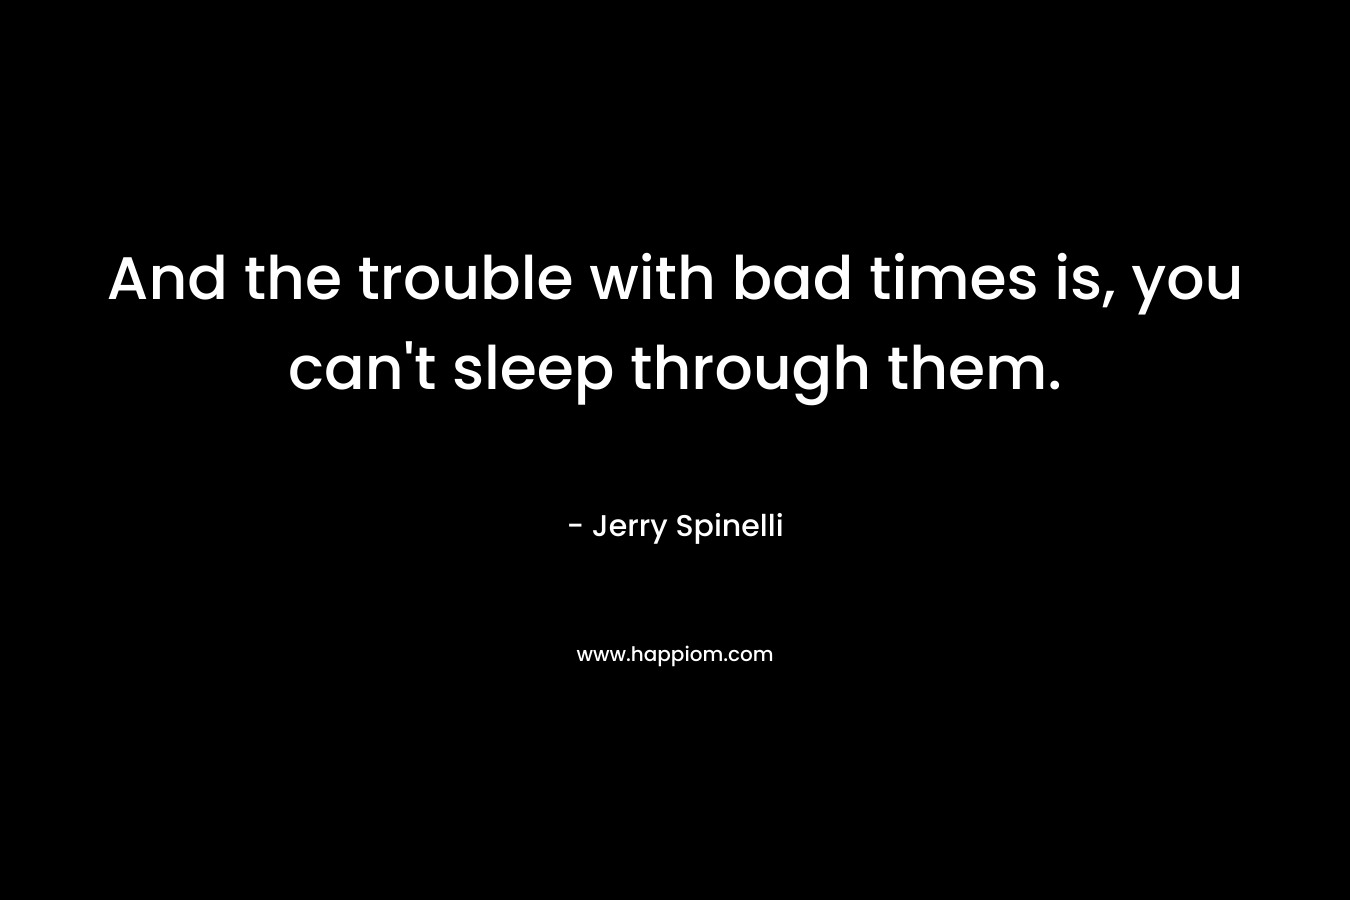 And the trouble with bad times is, you can’t sleep through them. – Jerry Spinelli